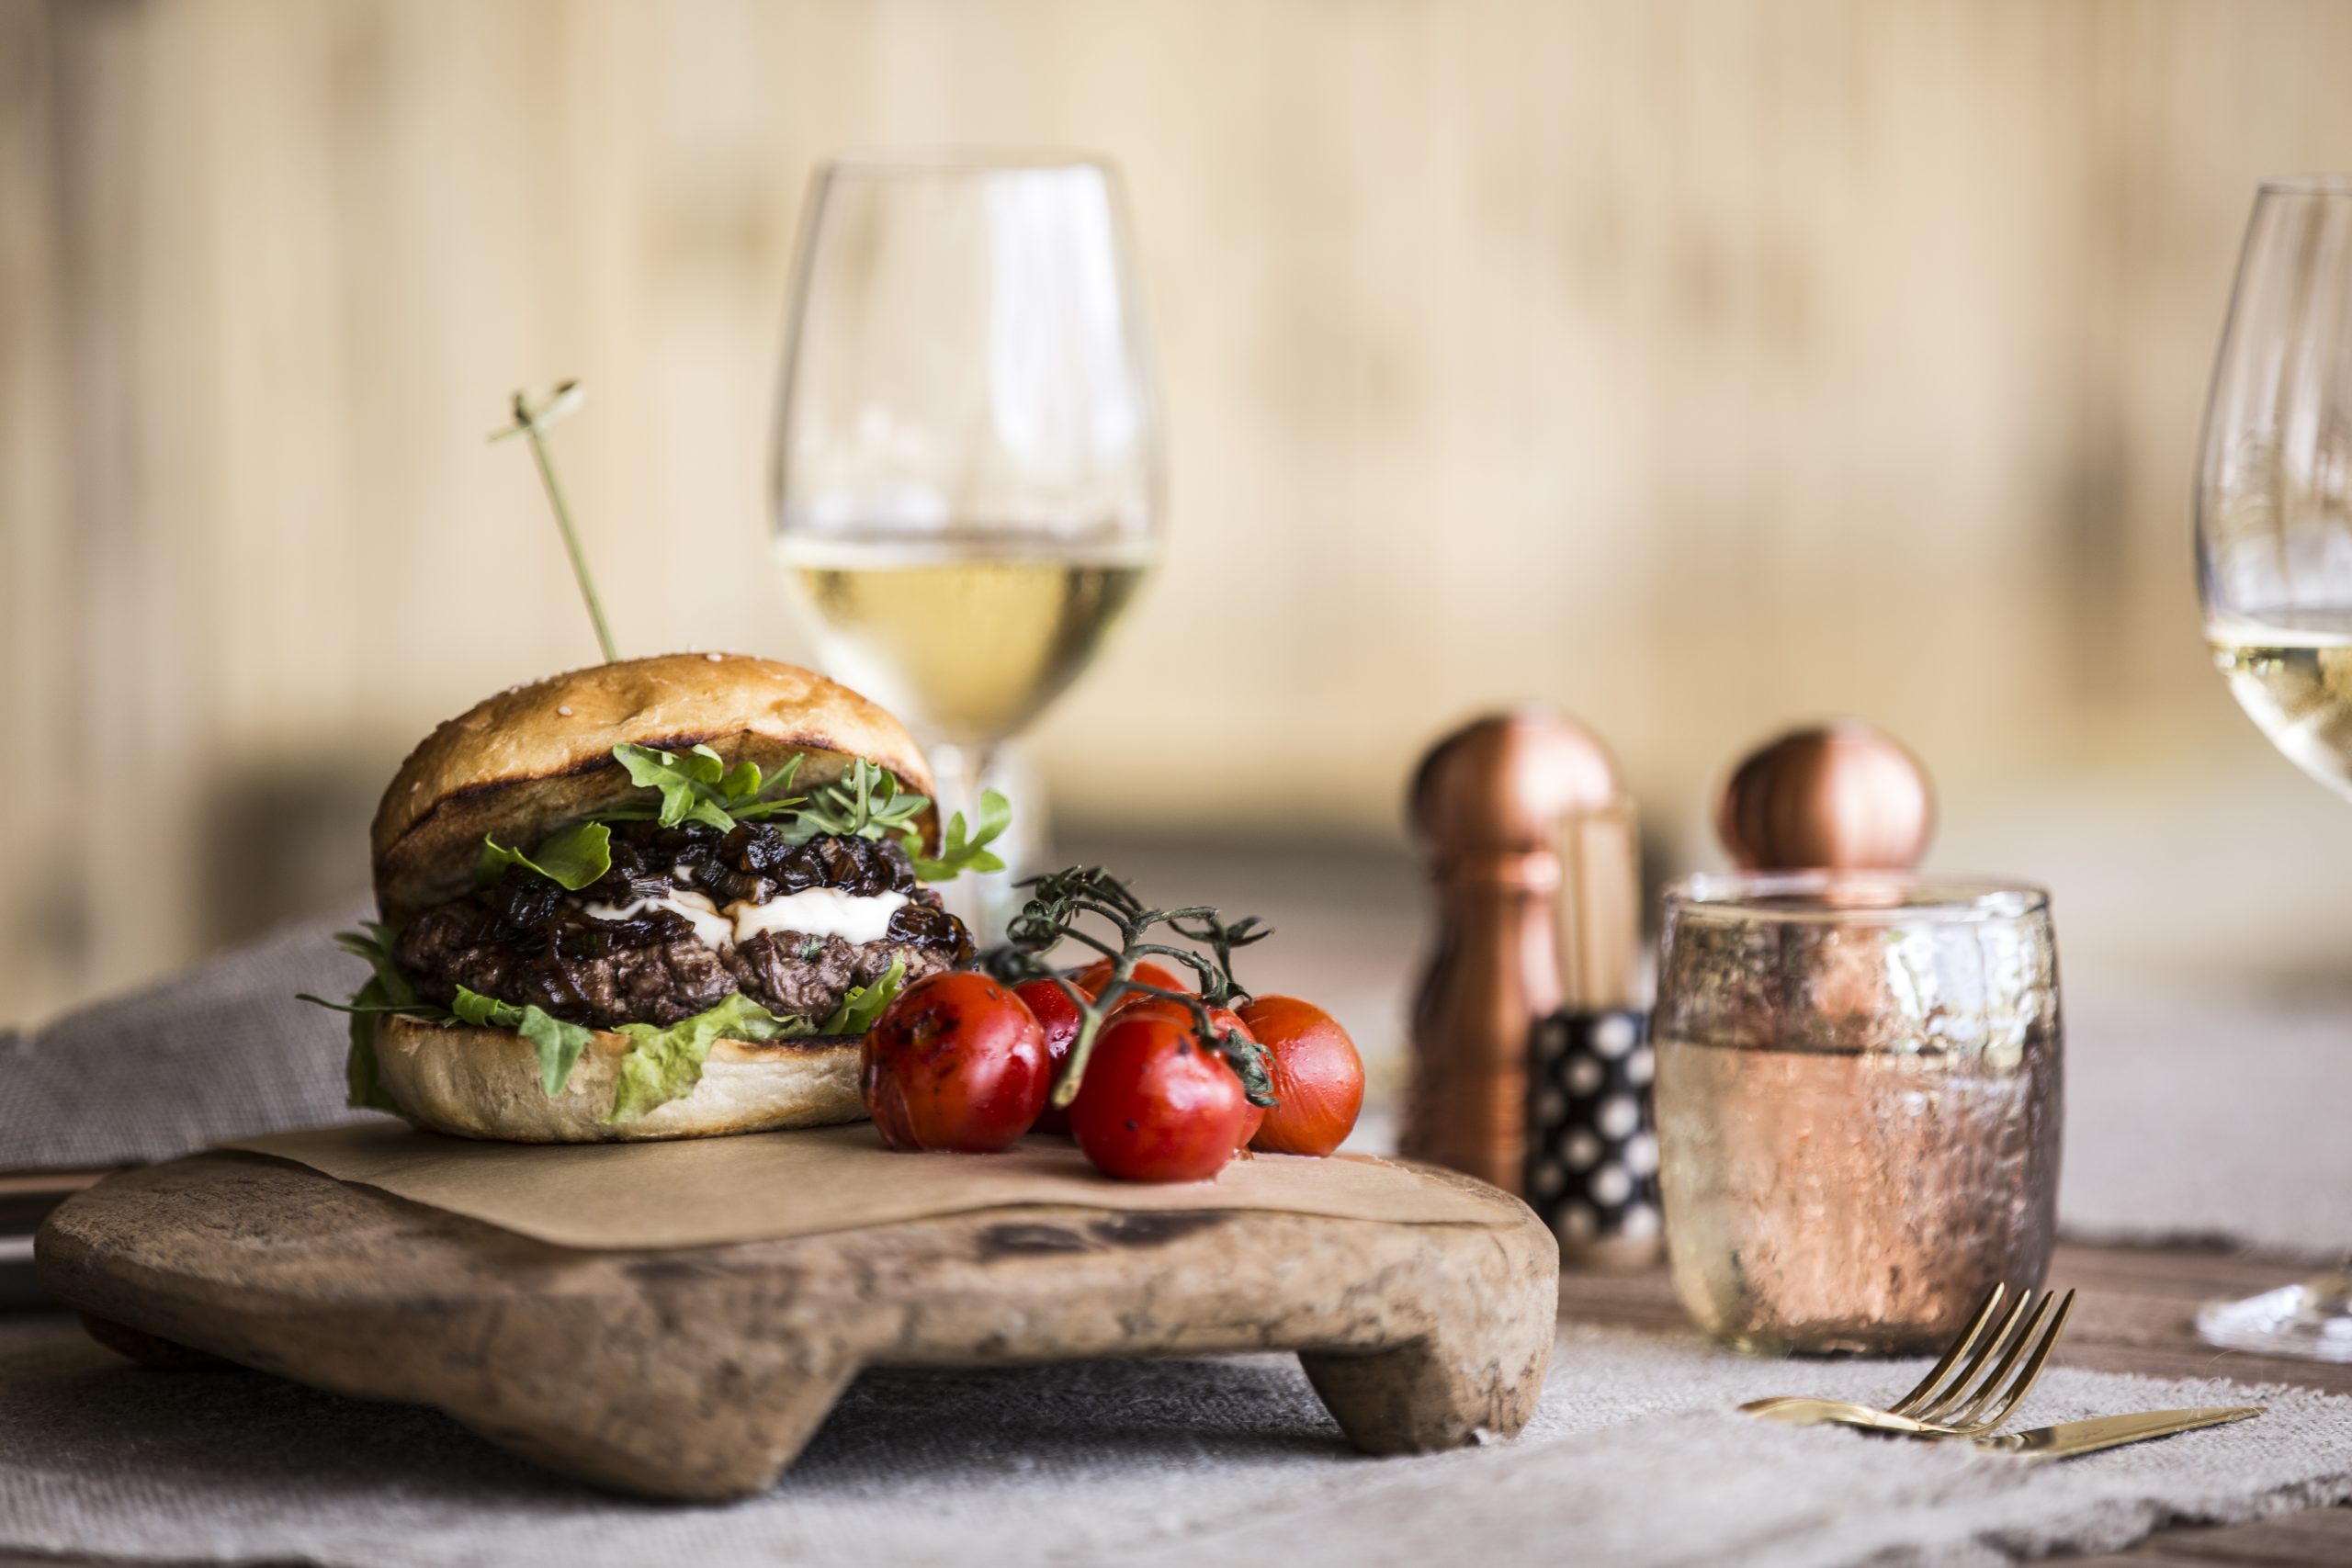 Fine dining cuisine; burger and wine at Camp Mombo. Part of the luxury safari package at Moremi-reserve in Botswana.